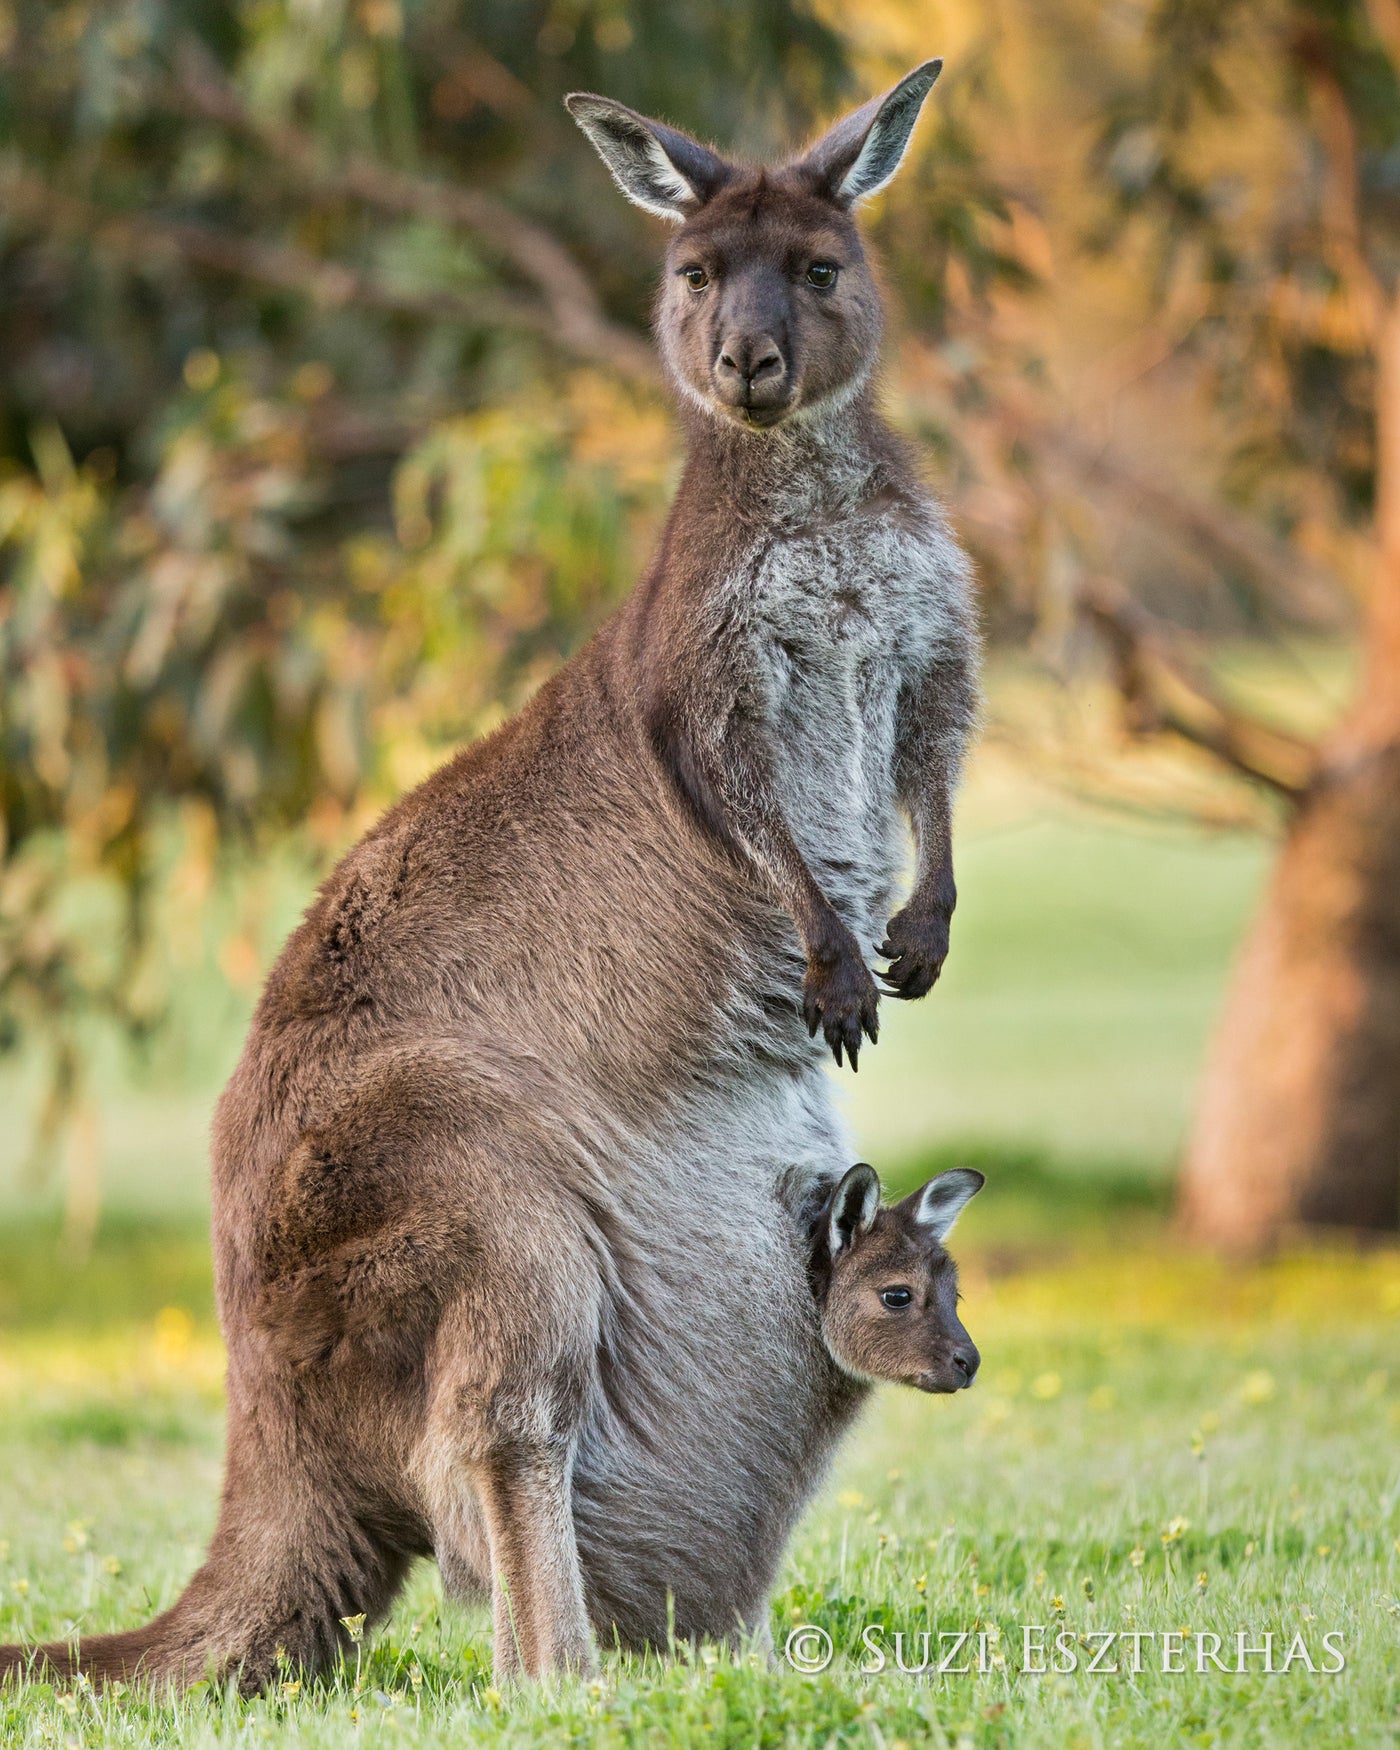 kangaroo with joey in pouch